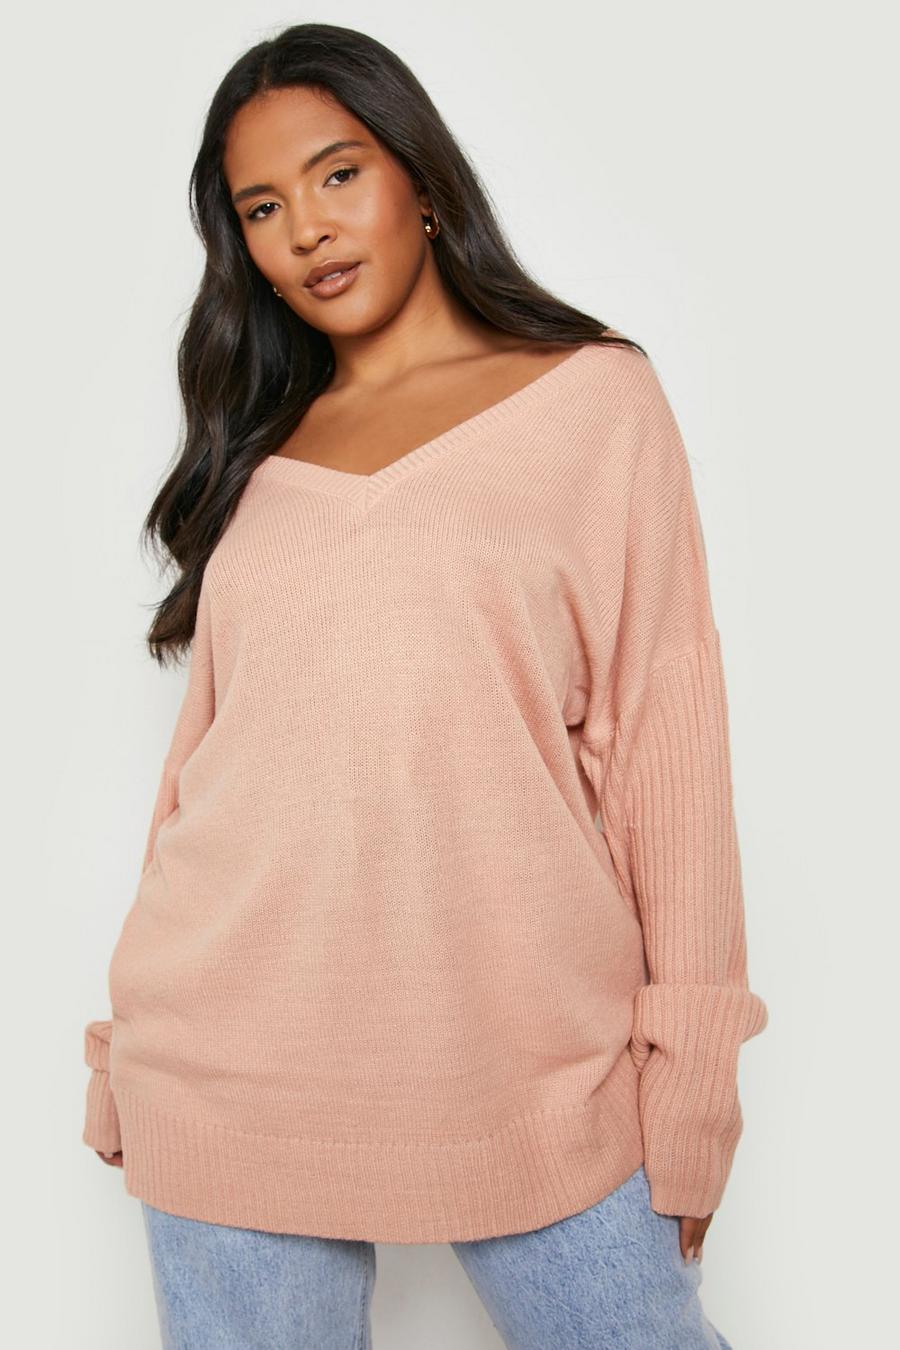 Blush Plus Sweater With V Neck Detail Front And Back